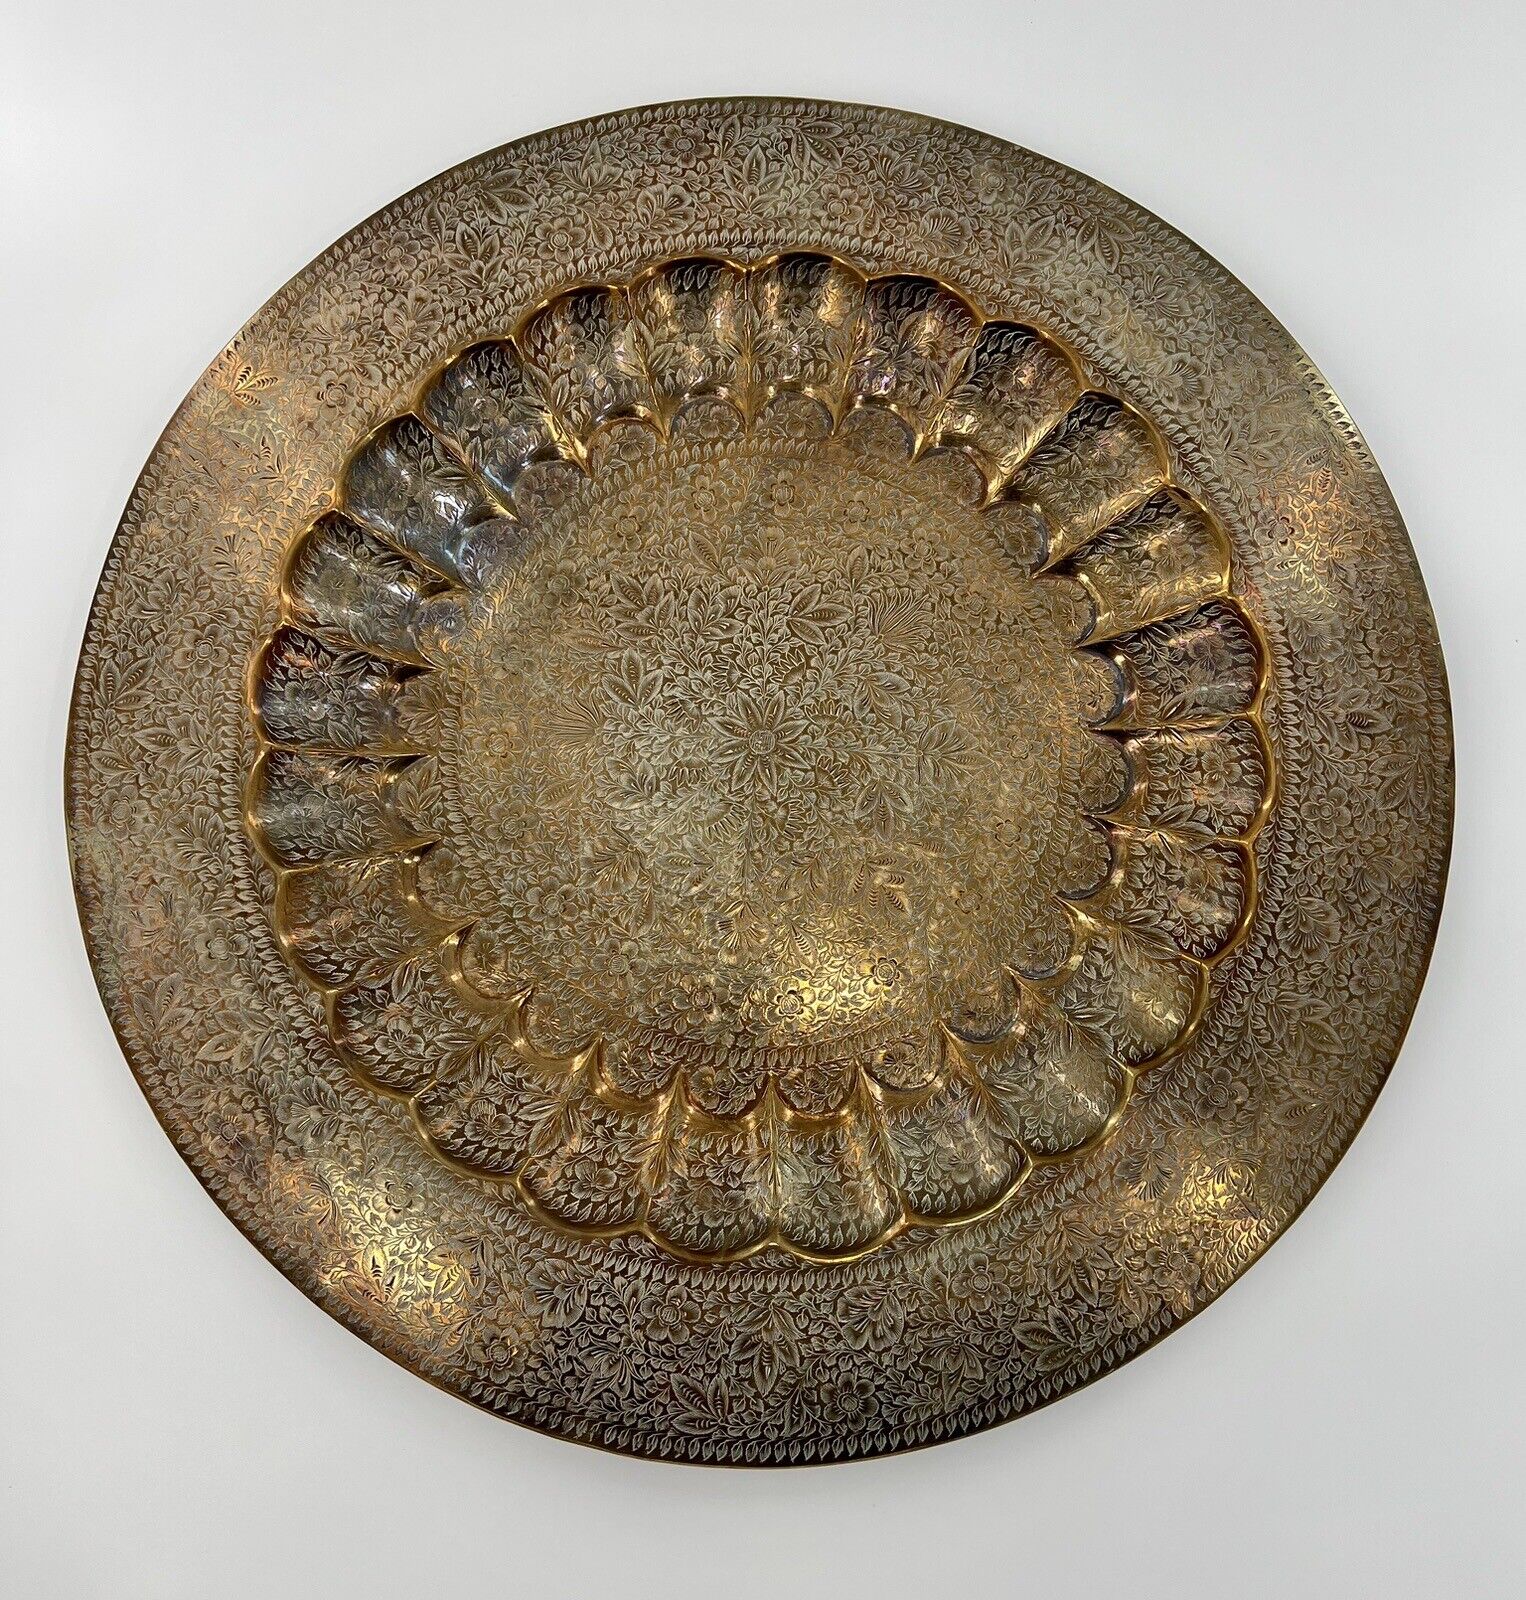 23” Round Antique Patinated Polished Brass Tray/Hand Crafted/Decorative Tray